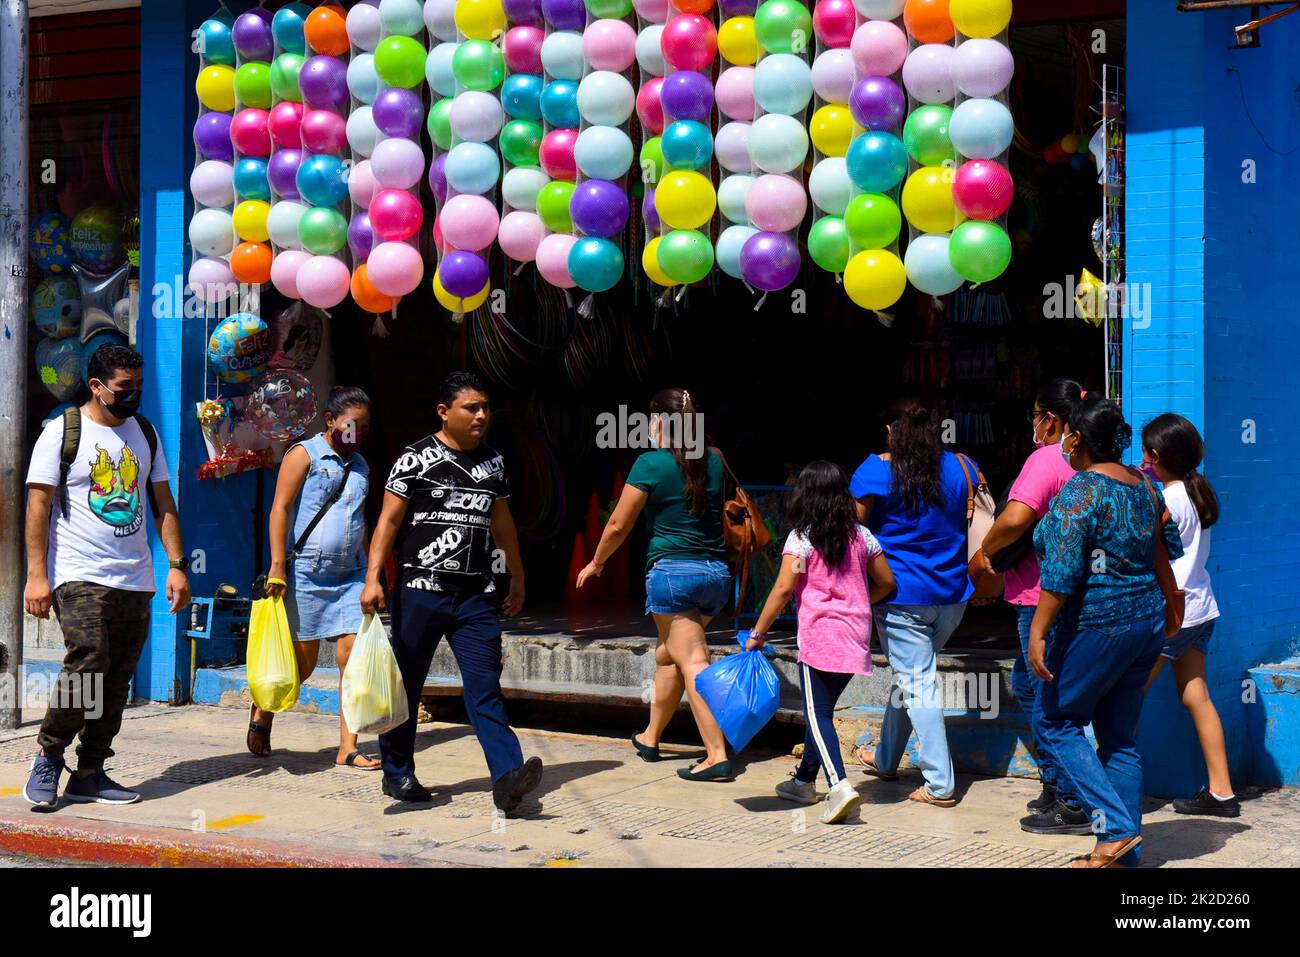 People walking in front of a shop selling balloons in downtown Merida, mexico Stock Photo